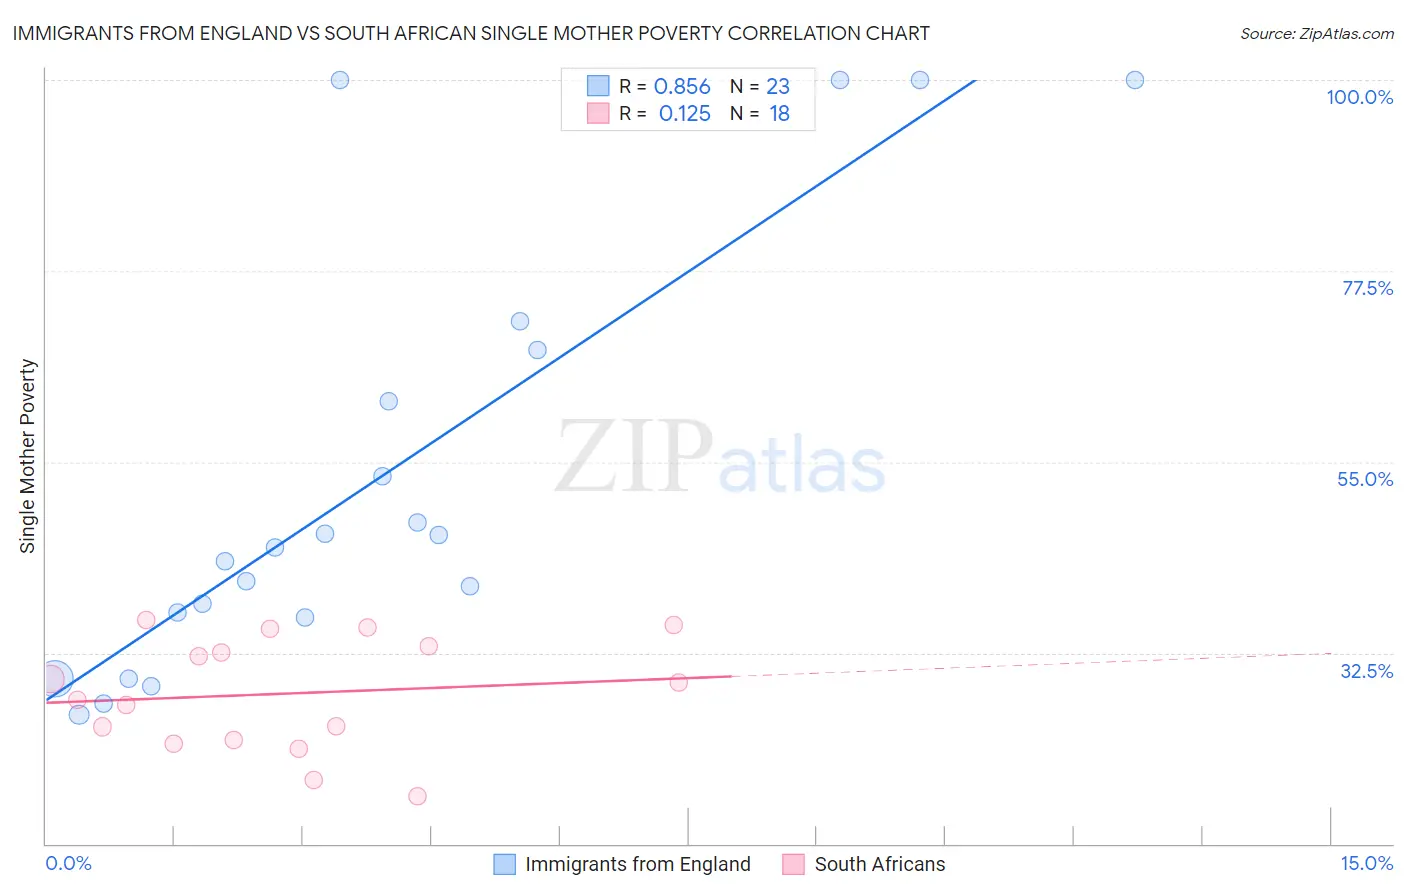 Immigrants from England vs South African Single Mother Poverty